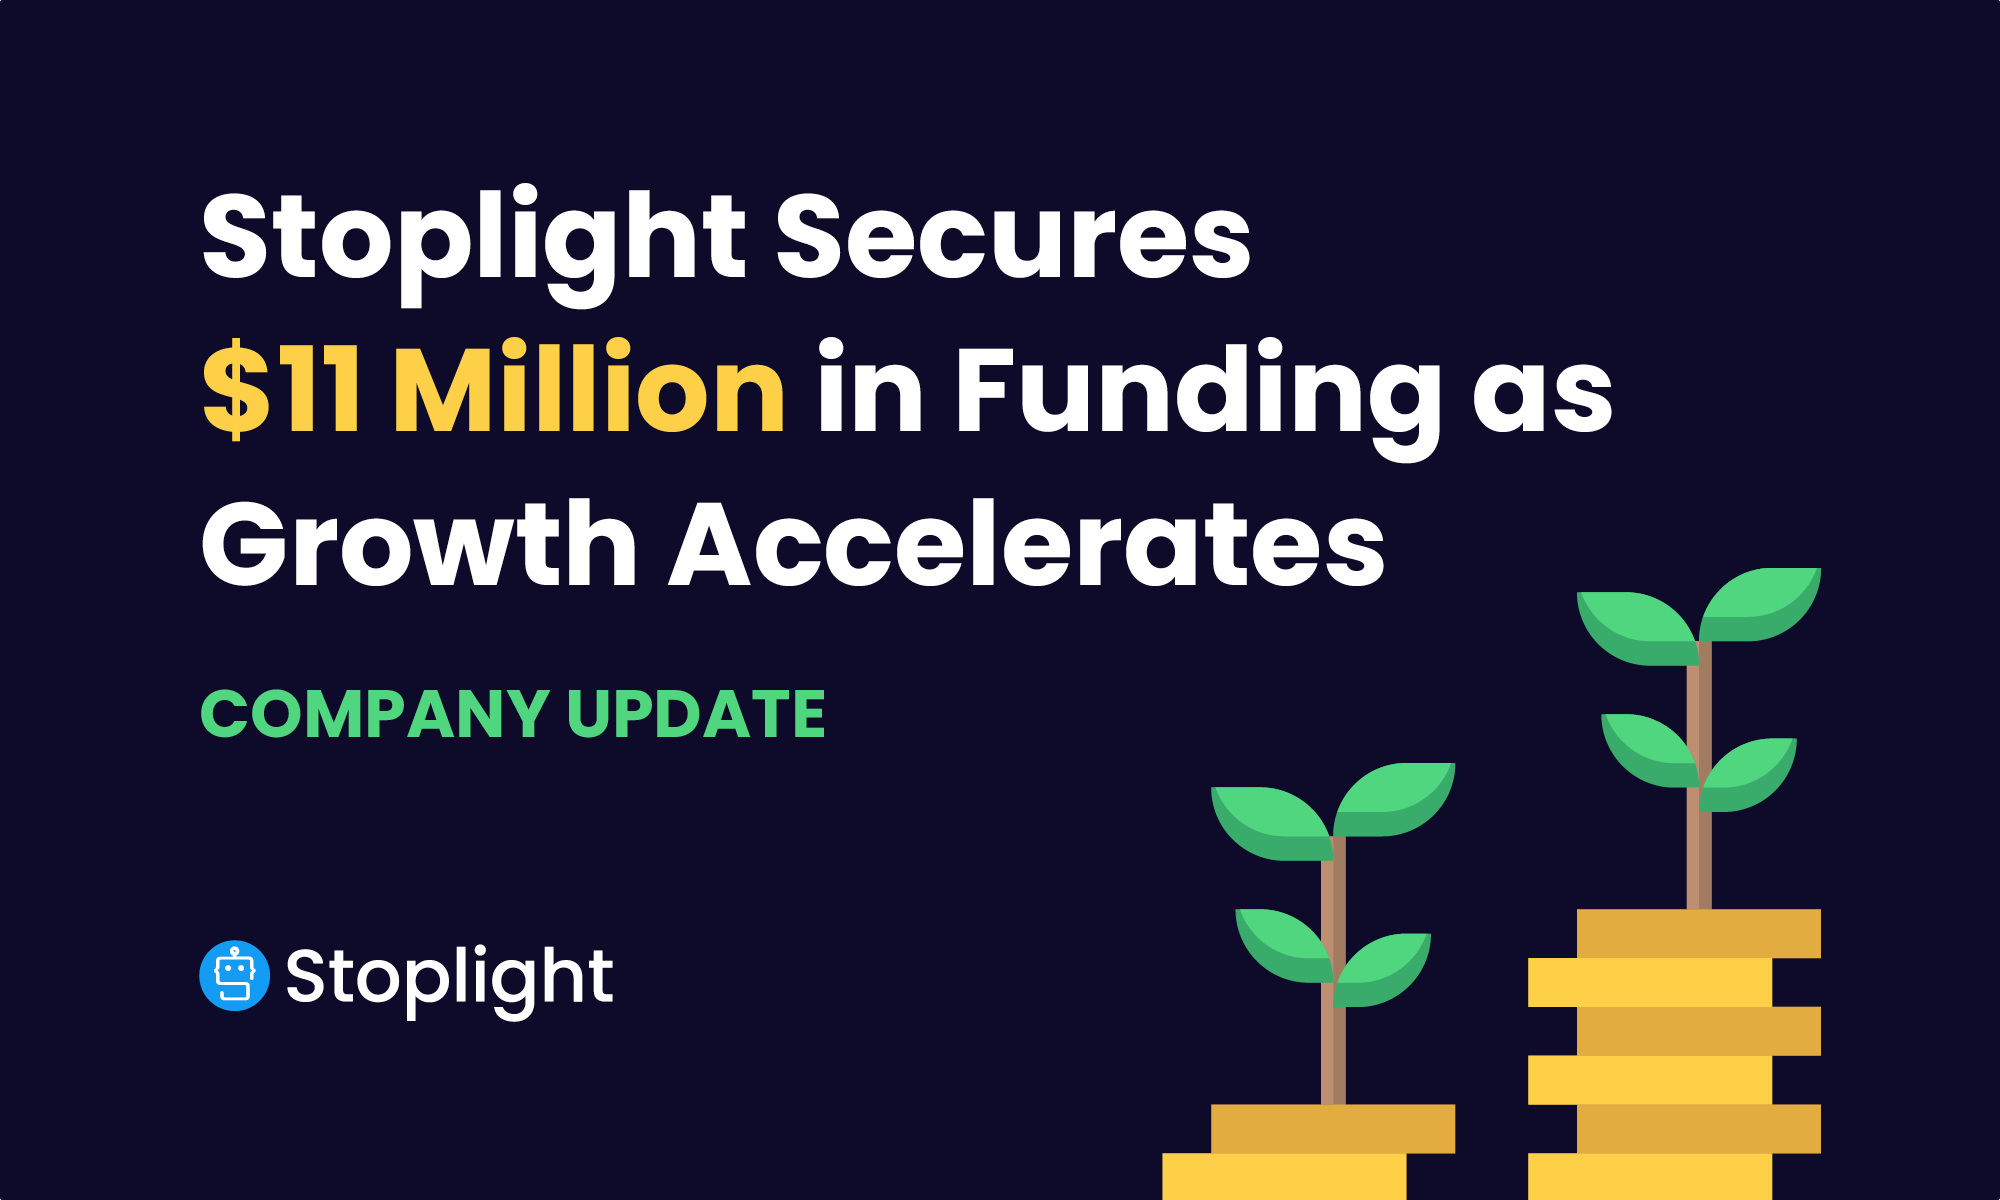 Stoplight Secures $11 Million in Funding as Growth Accelerates